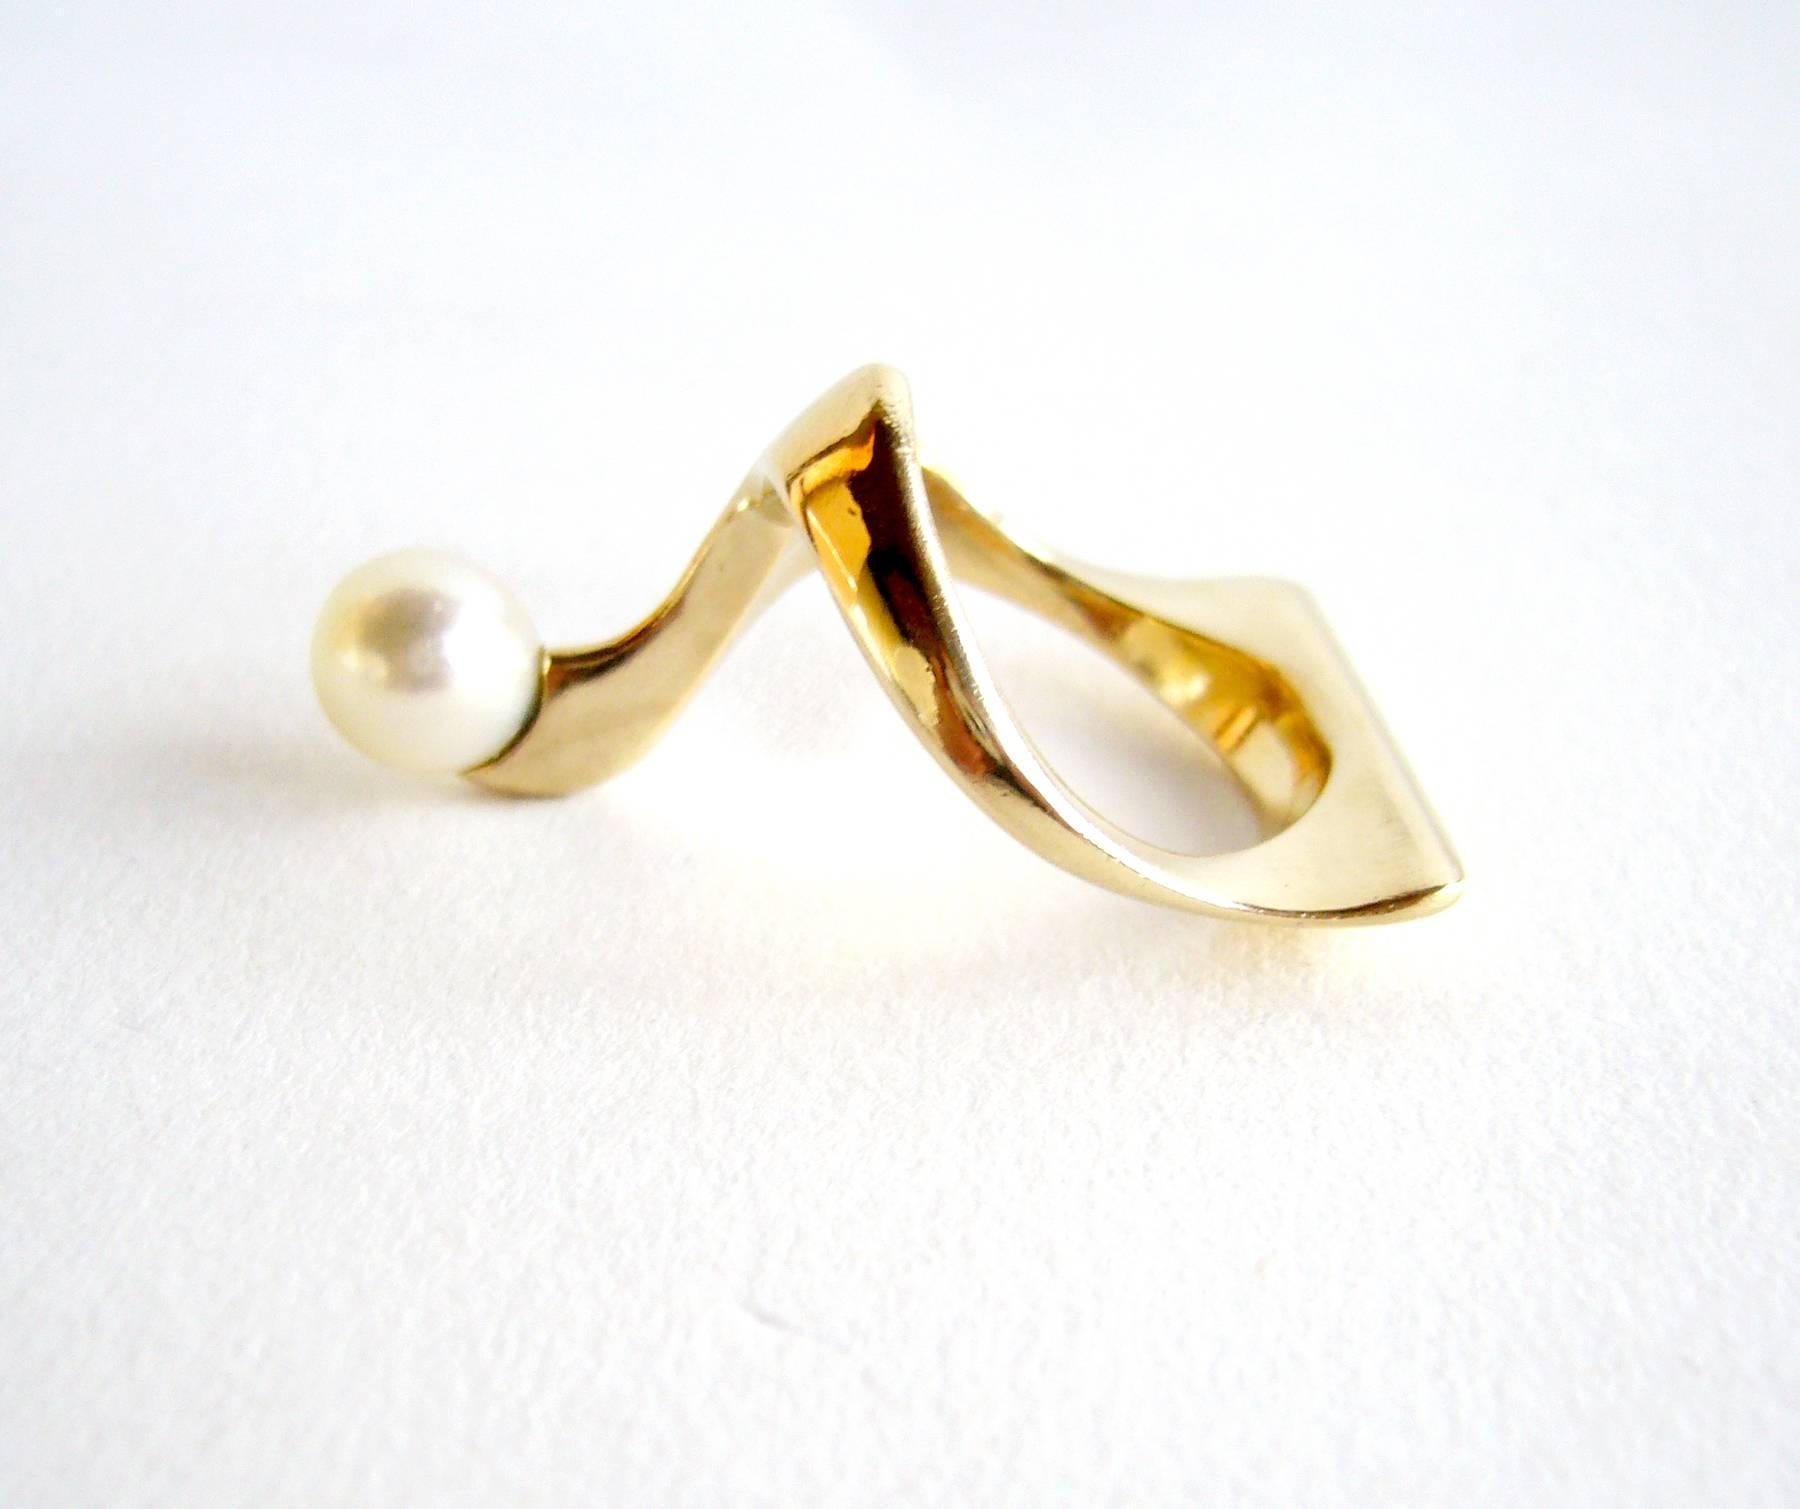 14k gold and pearl American modernist ring, circa 1950's.  Ring is reminiscent of designs by Ed Wiener of NYC. A finger size 5 - 5.25 and has a partial signature of -Mc, 14k.  In very good vintage condition.